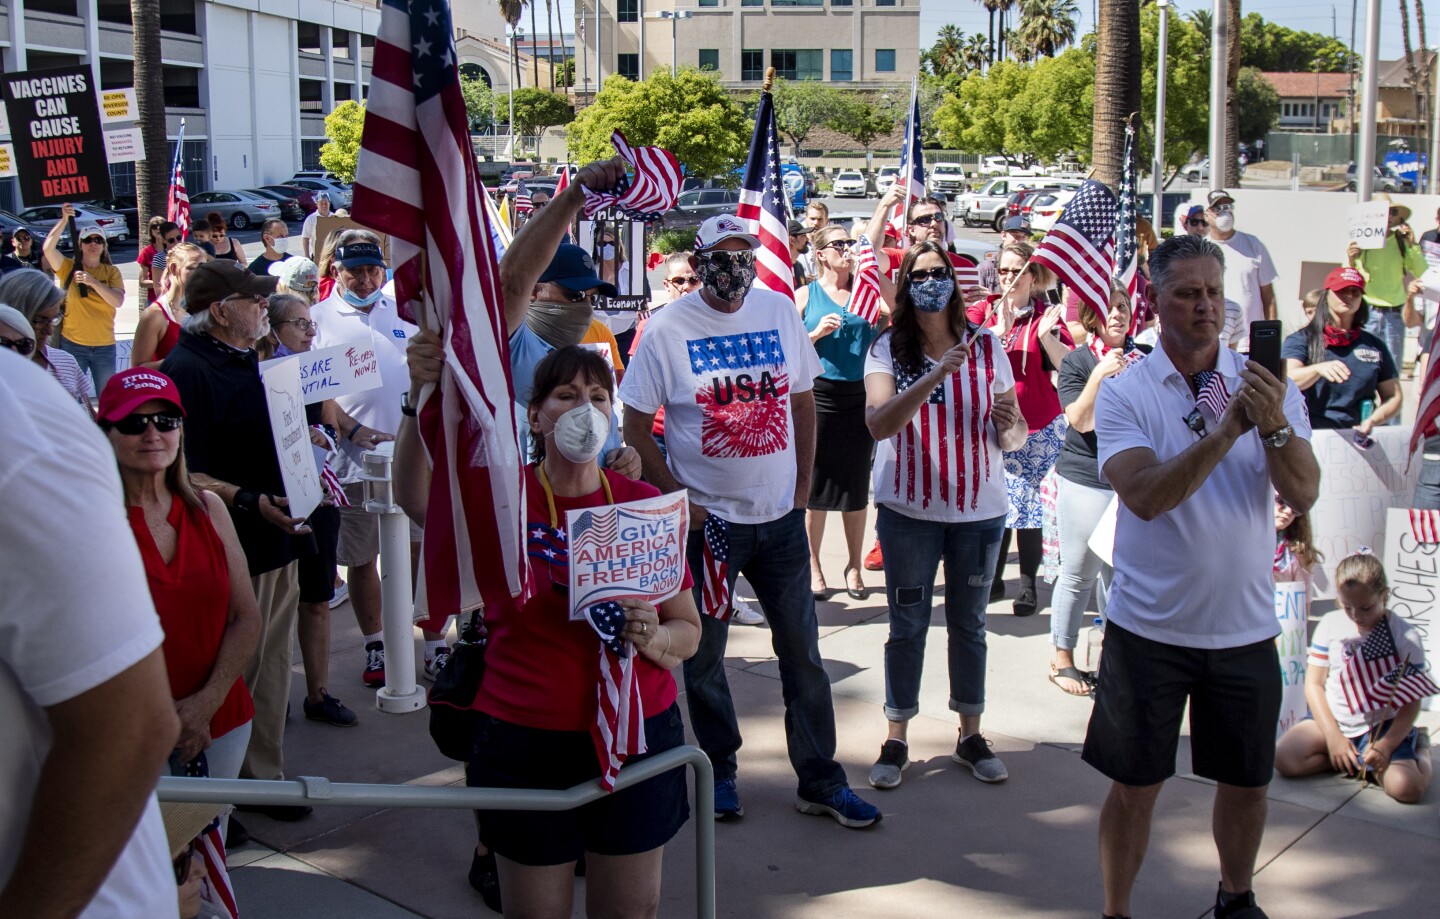 RIVERSIDE, CALIFORNIA - MAY 5, 2020: Protesters who want the public health orders rescinded, rally at the County Administrative Center where the Riverside County Board of Supervisors are meeting in the midst of the ongoing coronavirus pandemic on May 5, 2020 in Riverside, California. (Gina Ferazzi/Los Angeles Times)